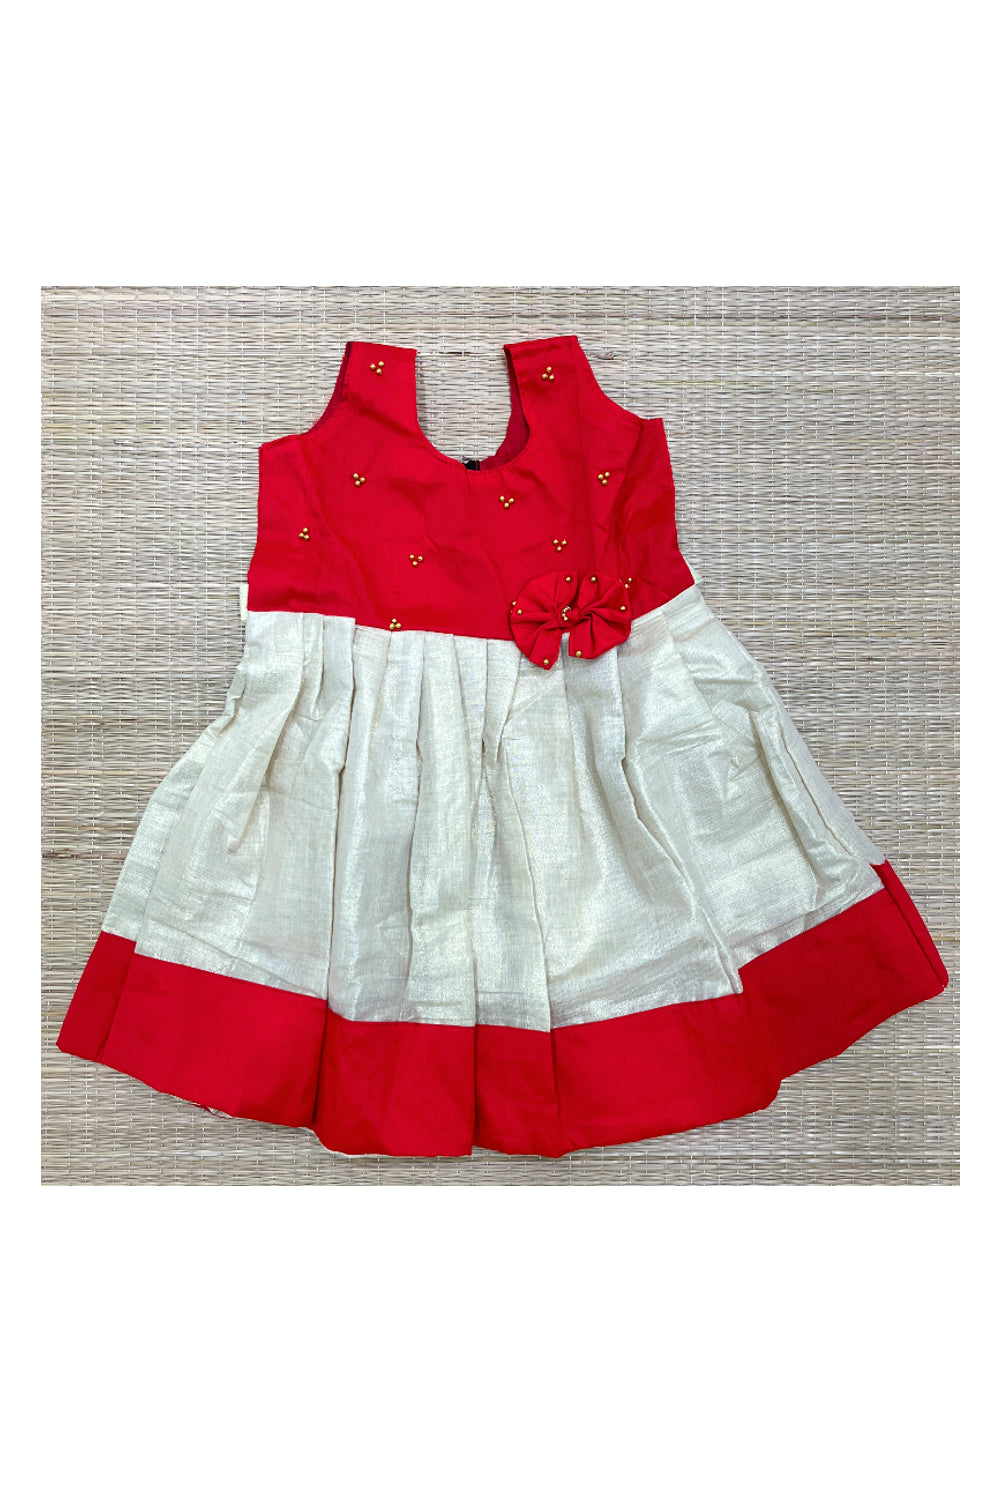 Southloom Kerala Tissue Frock with Red Bead Work Designs for Kids (2 Years)